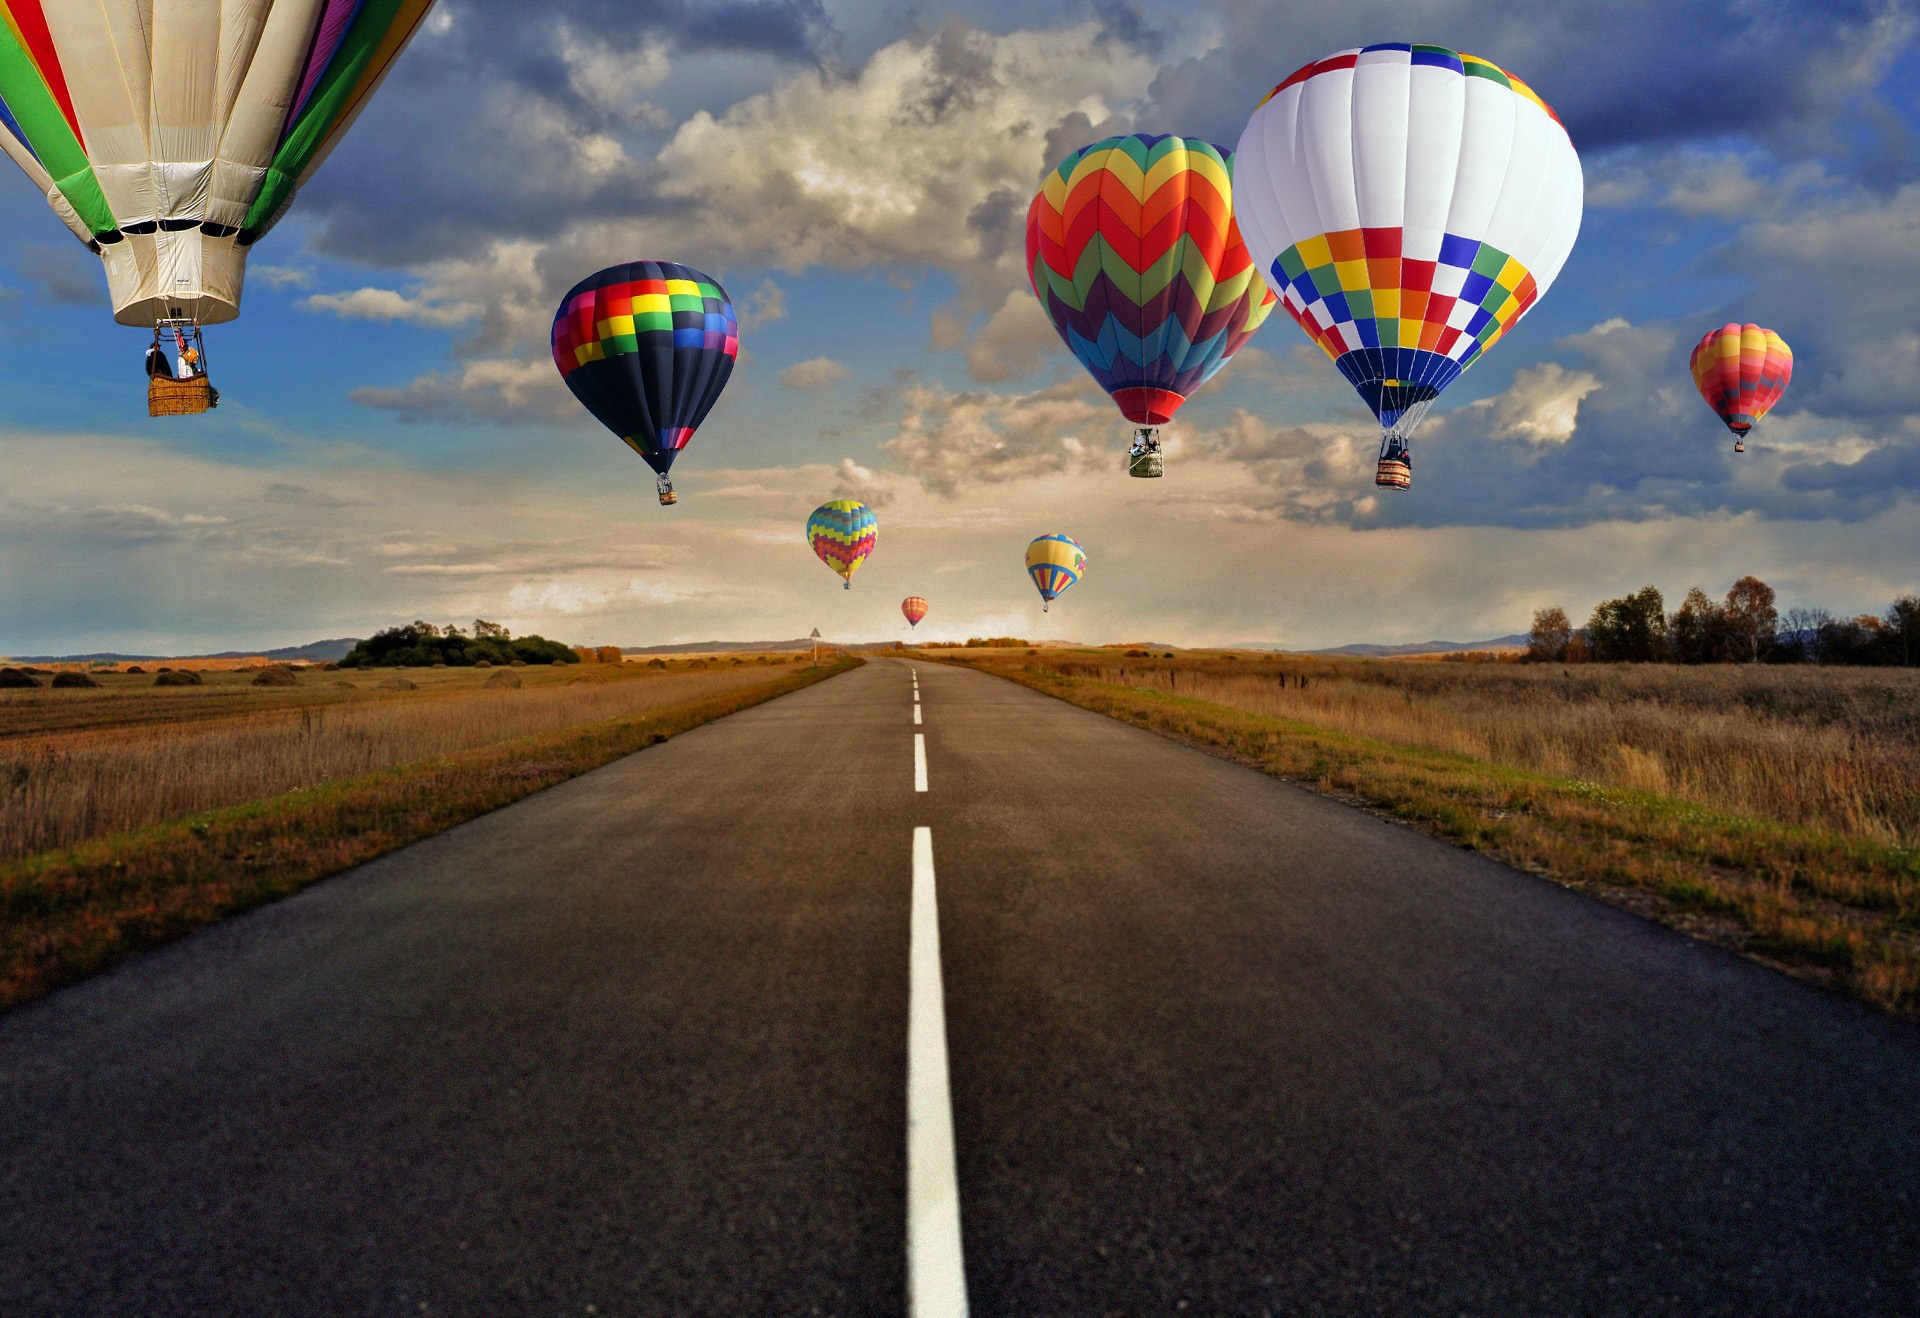 A road less traveled, unless by balloon. Various hot air balloons floating above a road through open spaces